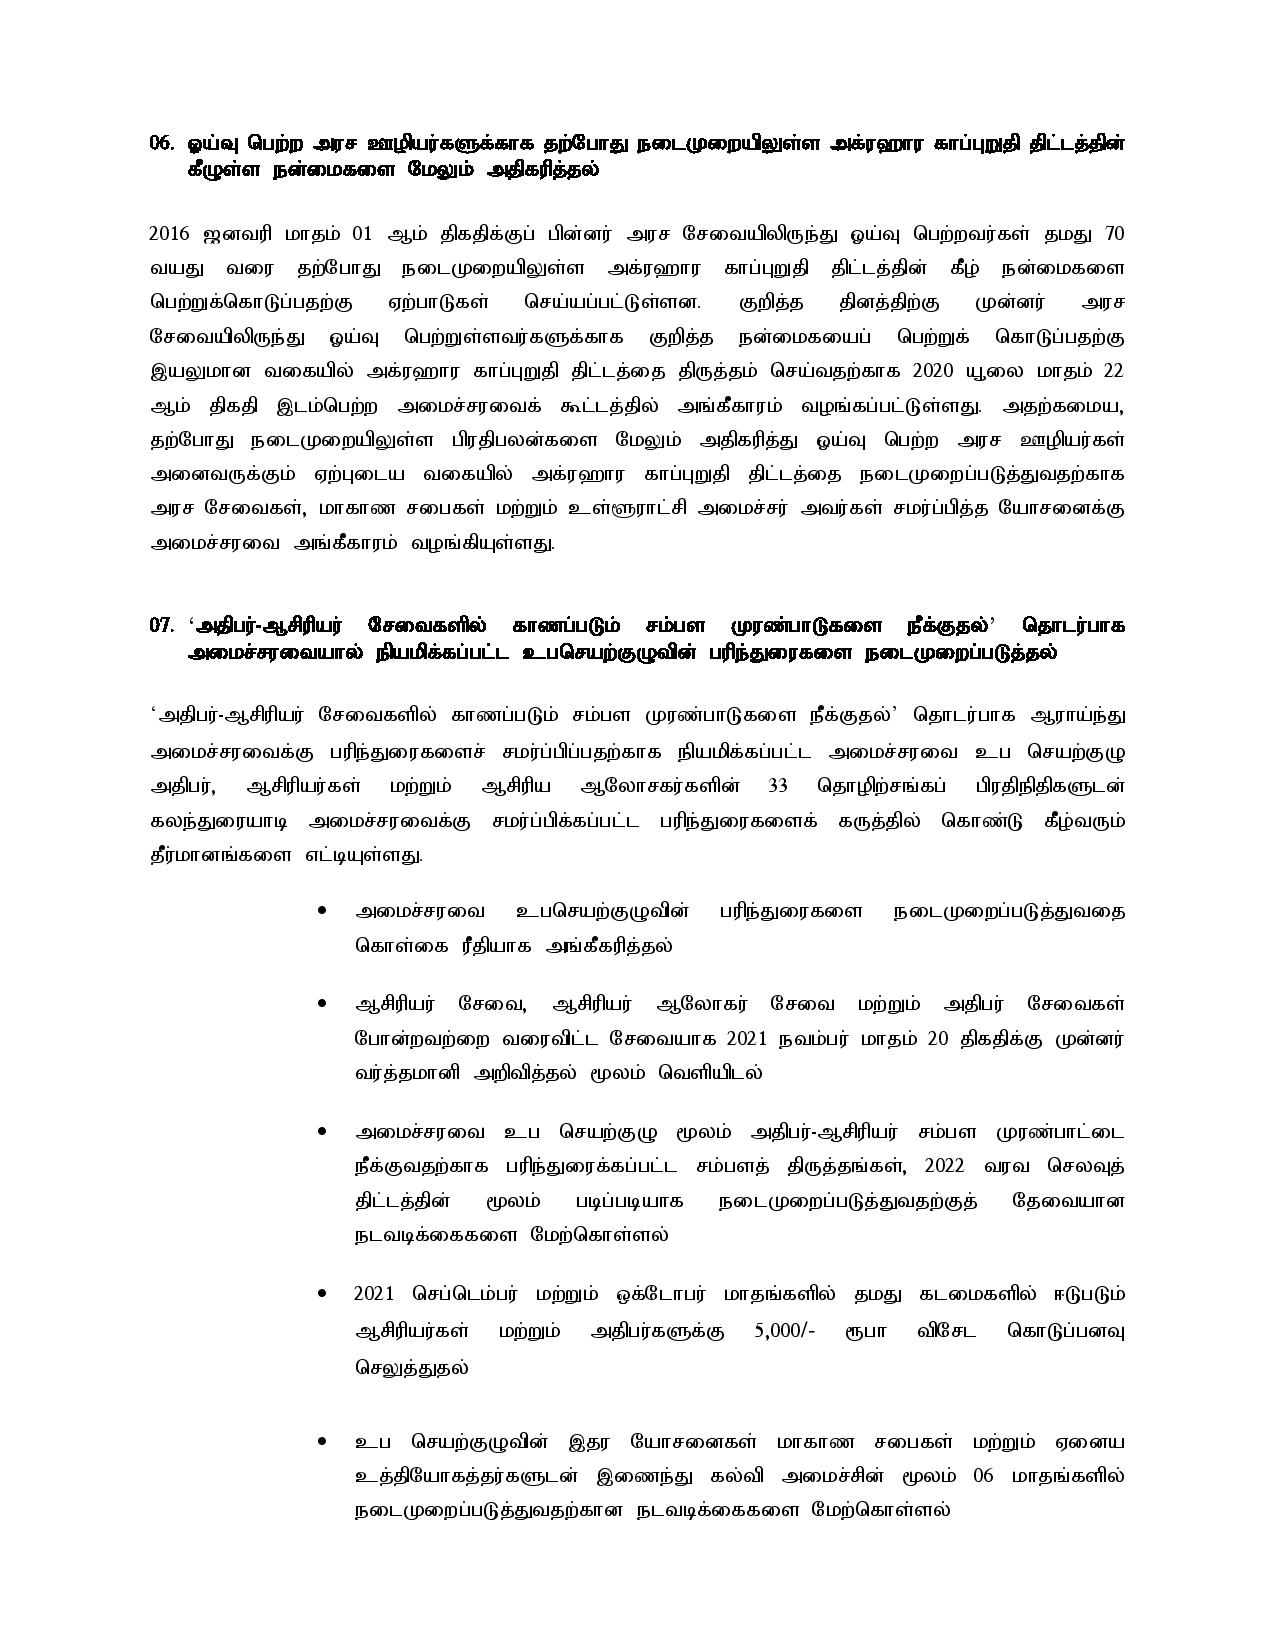 Cabinet Decision on 2021.08.30Tamil page 003